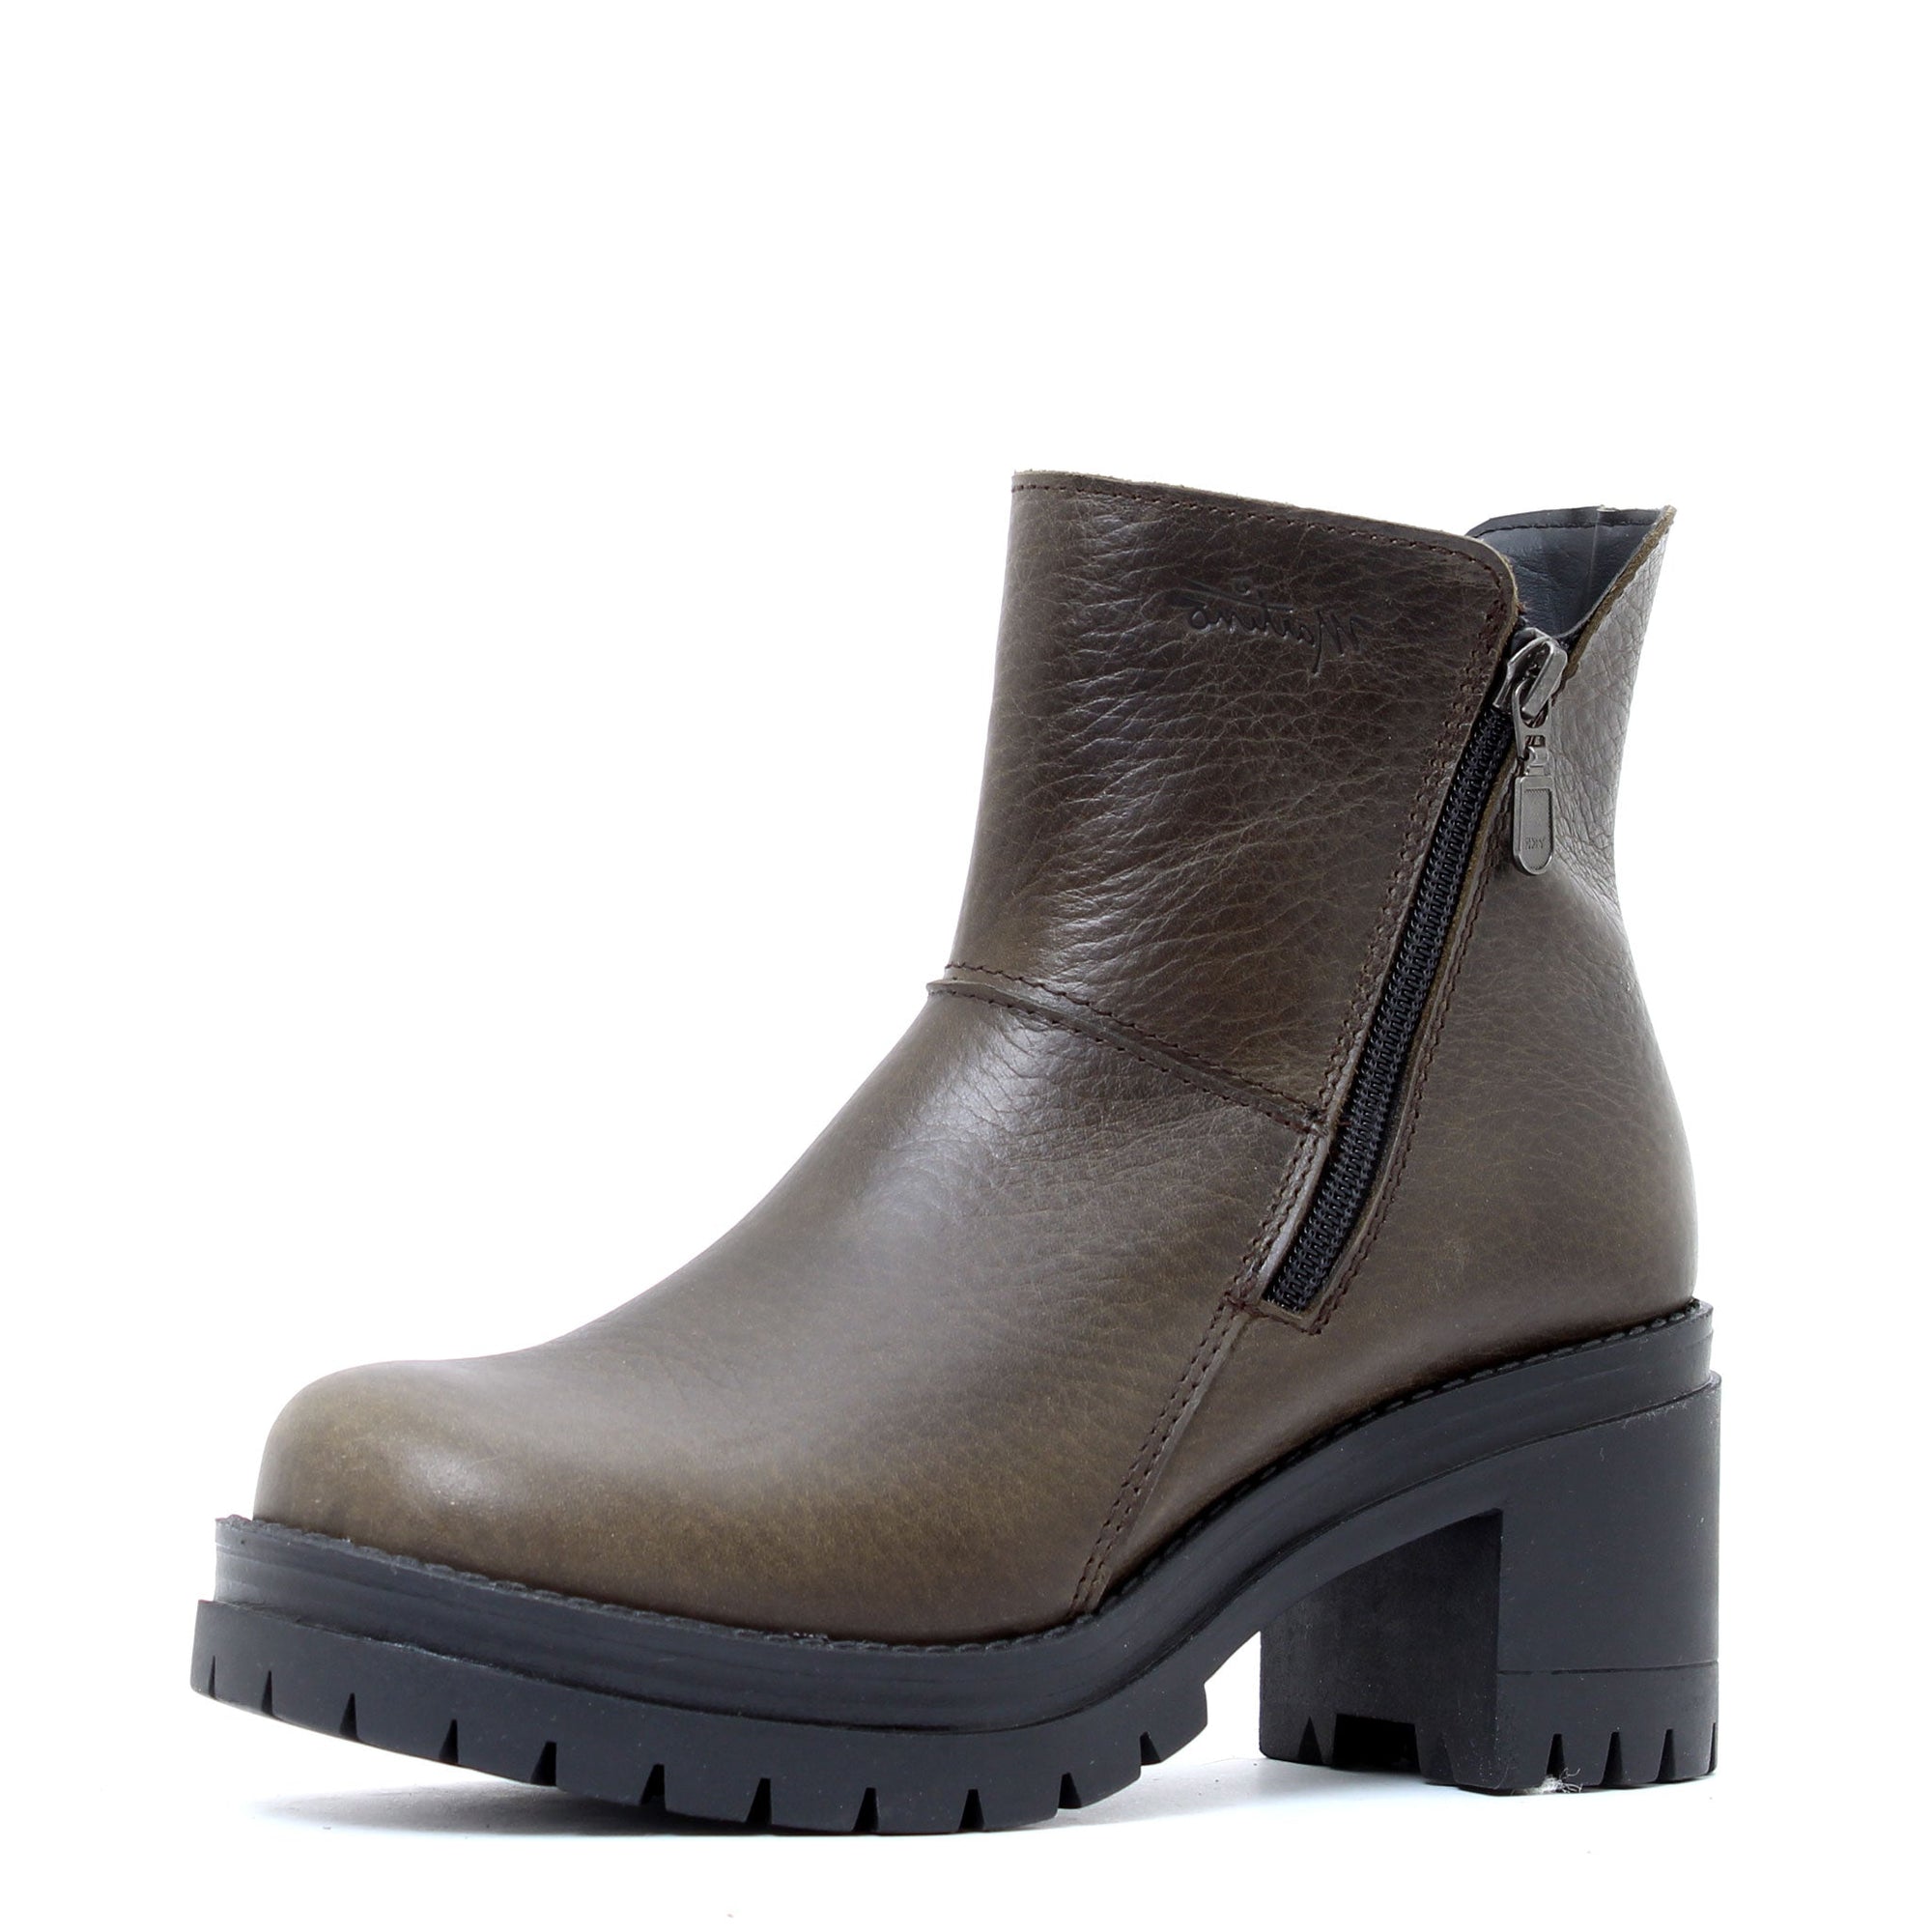 Peggy 3-season boot for women - Olive